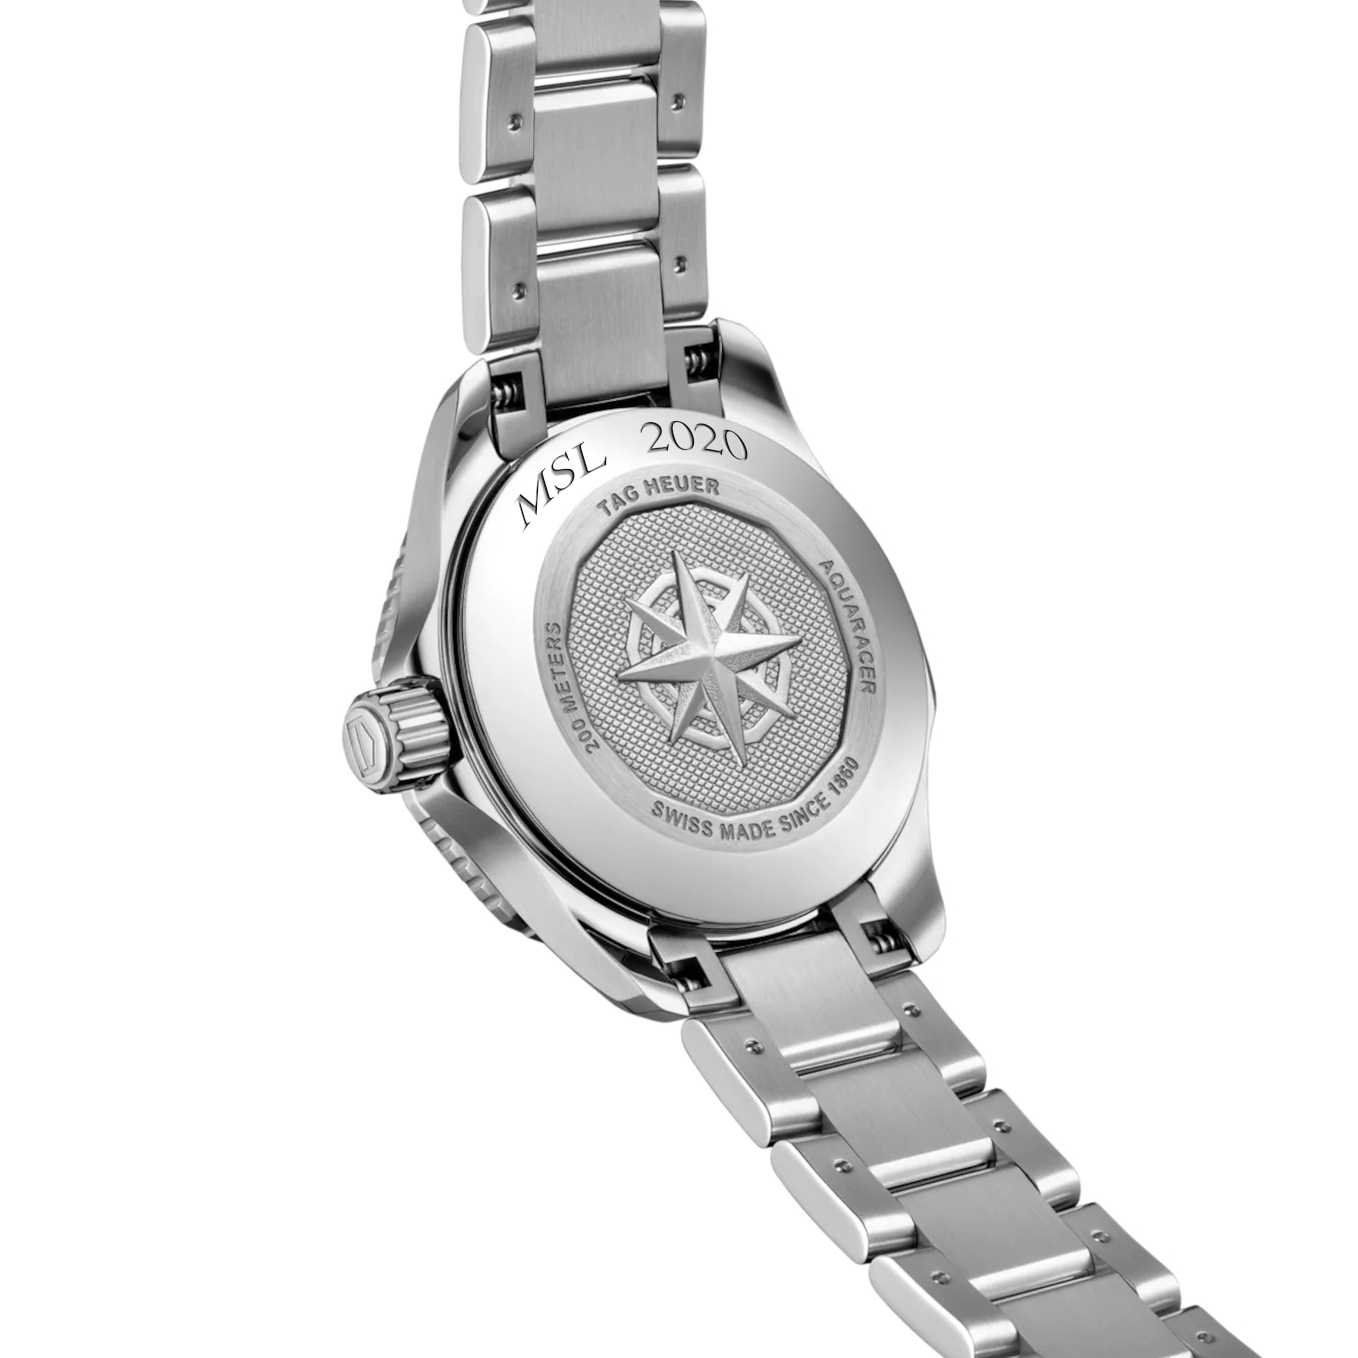 Fairfield Women's TAG Heuer Steel Aquaracer with Blue Sunray Dial - Image 3